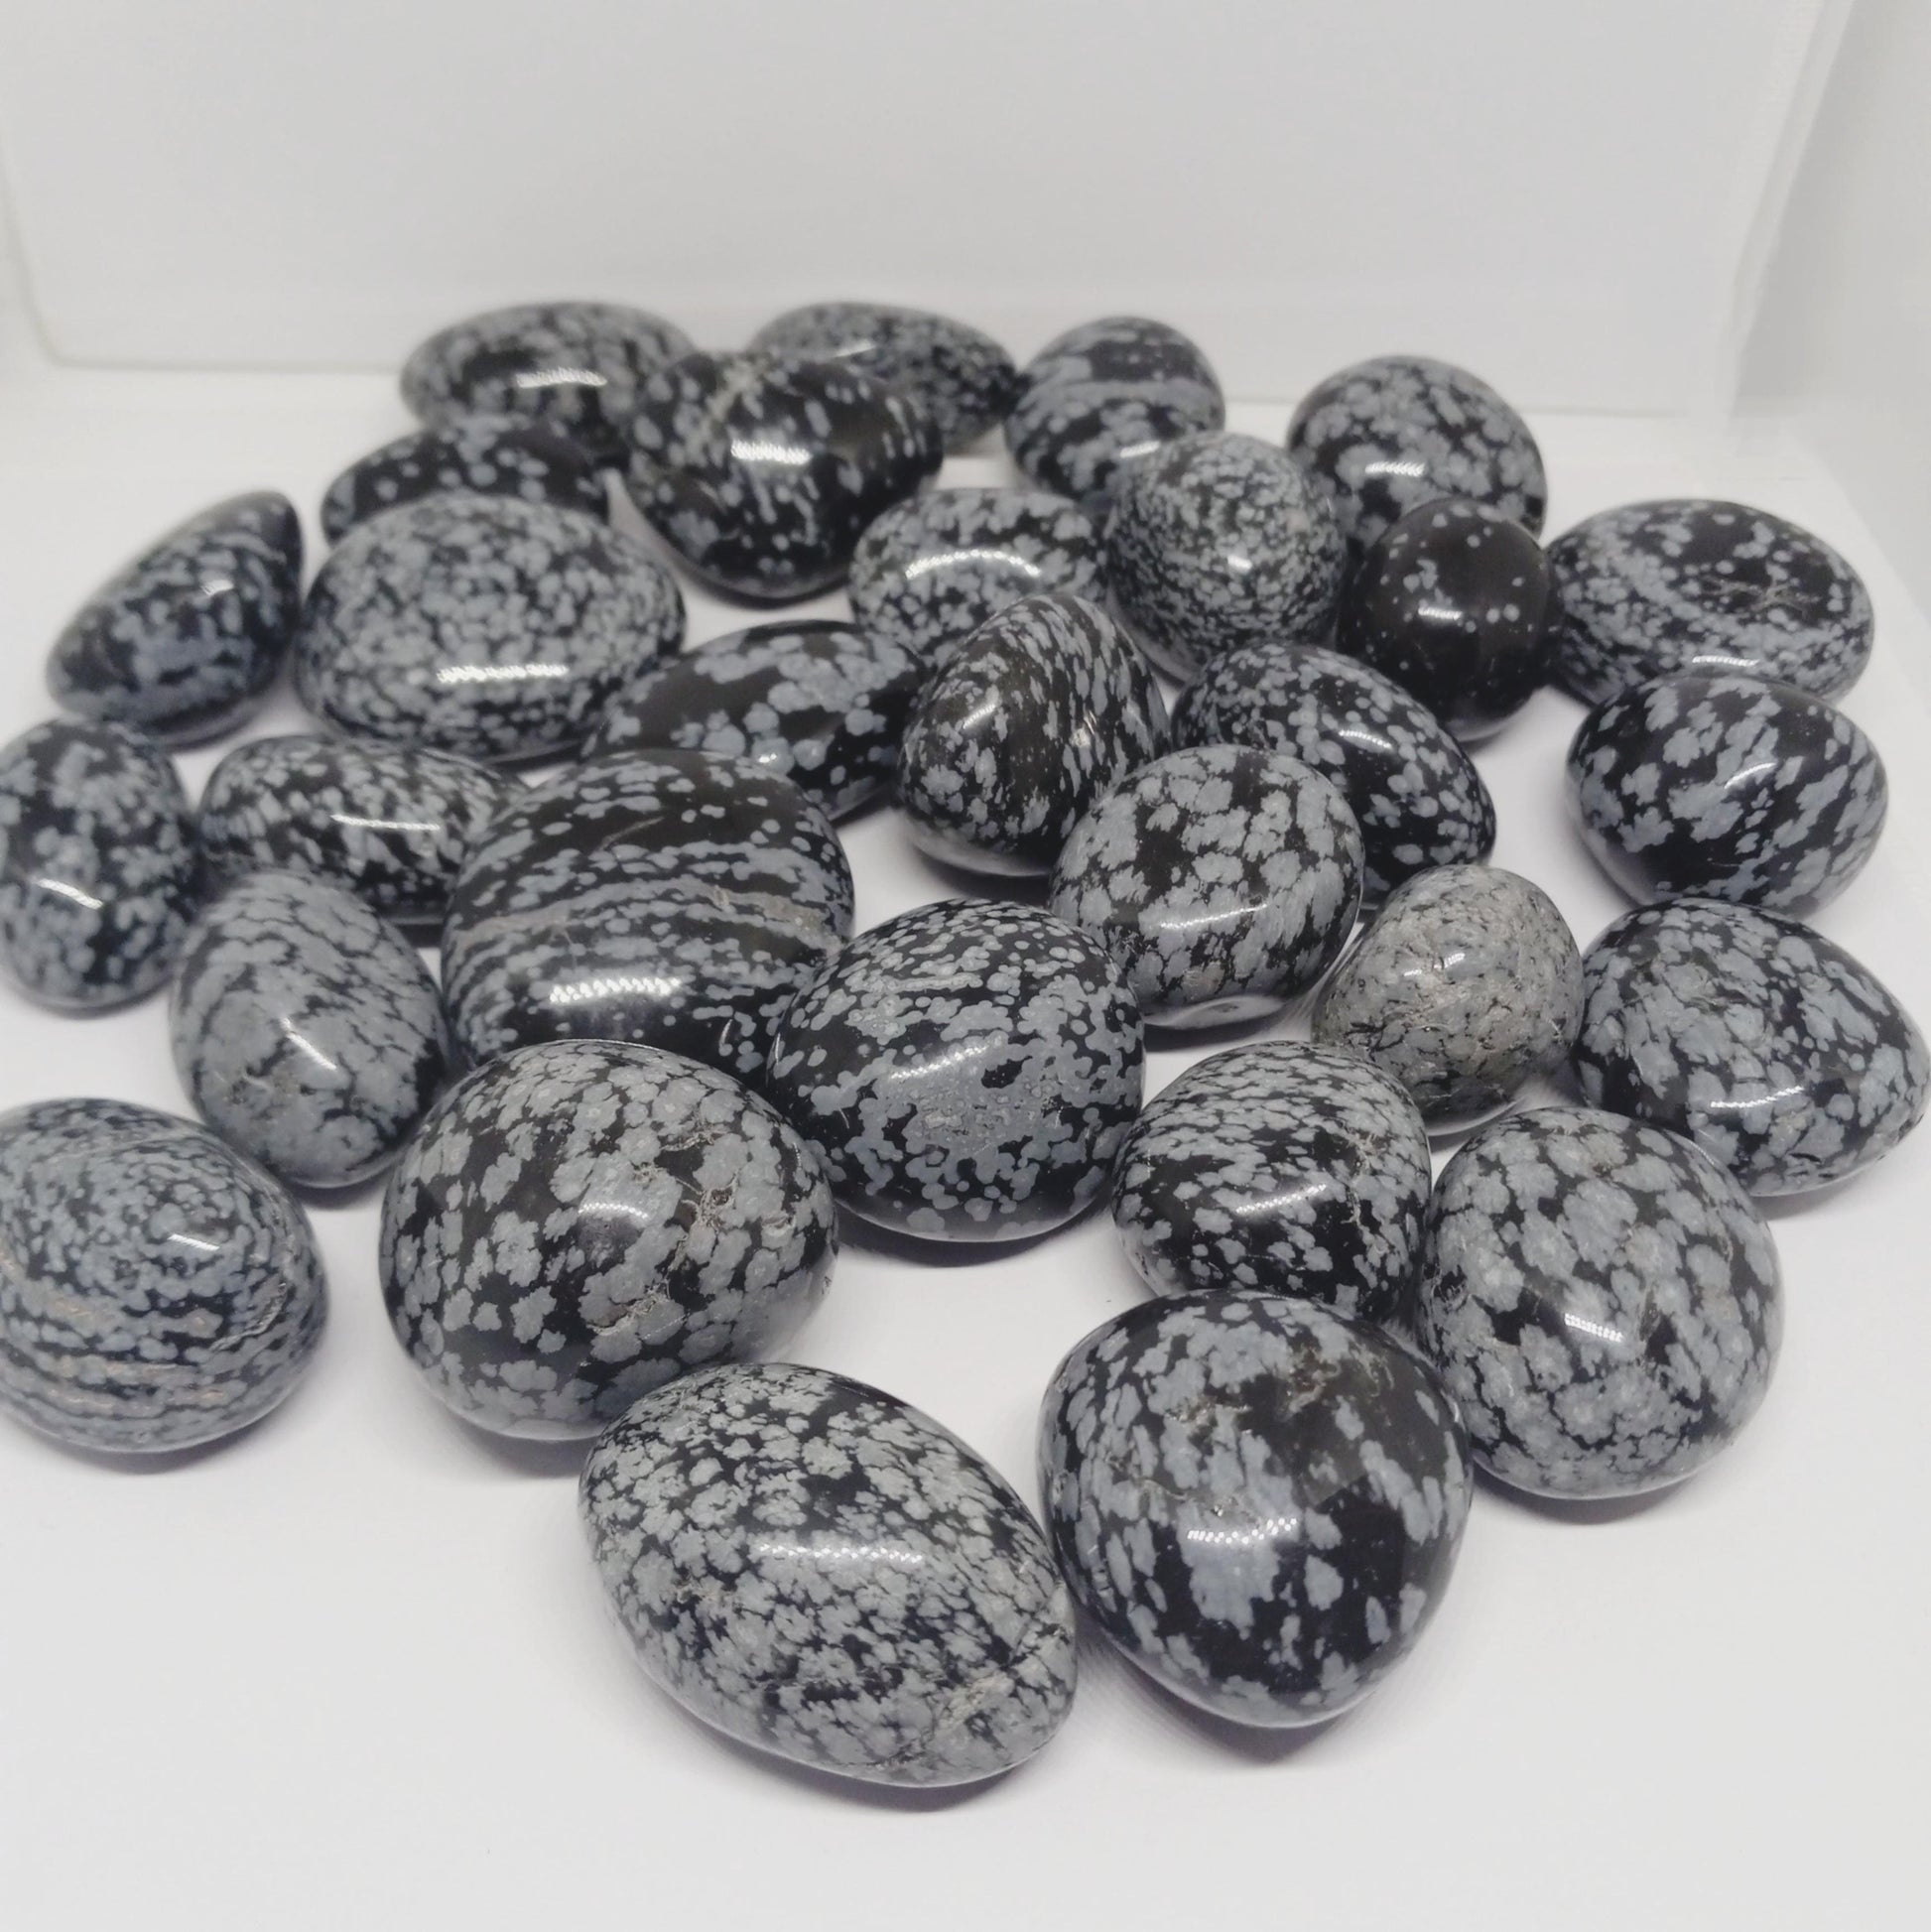 Top Quality Snowflake Obsidian Natural Tumbled Reiki Crystal $2.25 - Guiding Lights Boutique